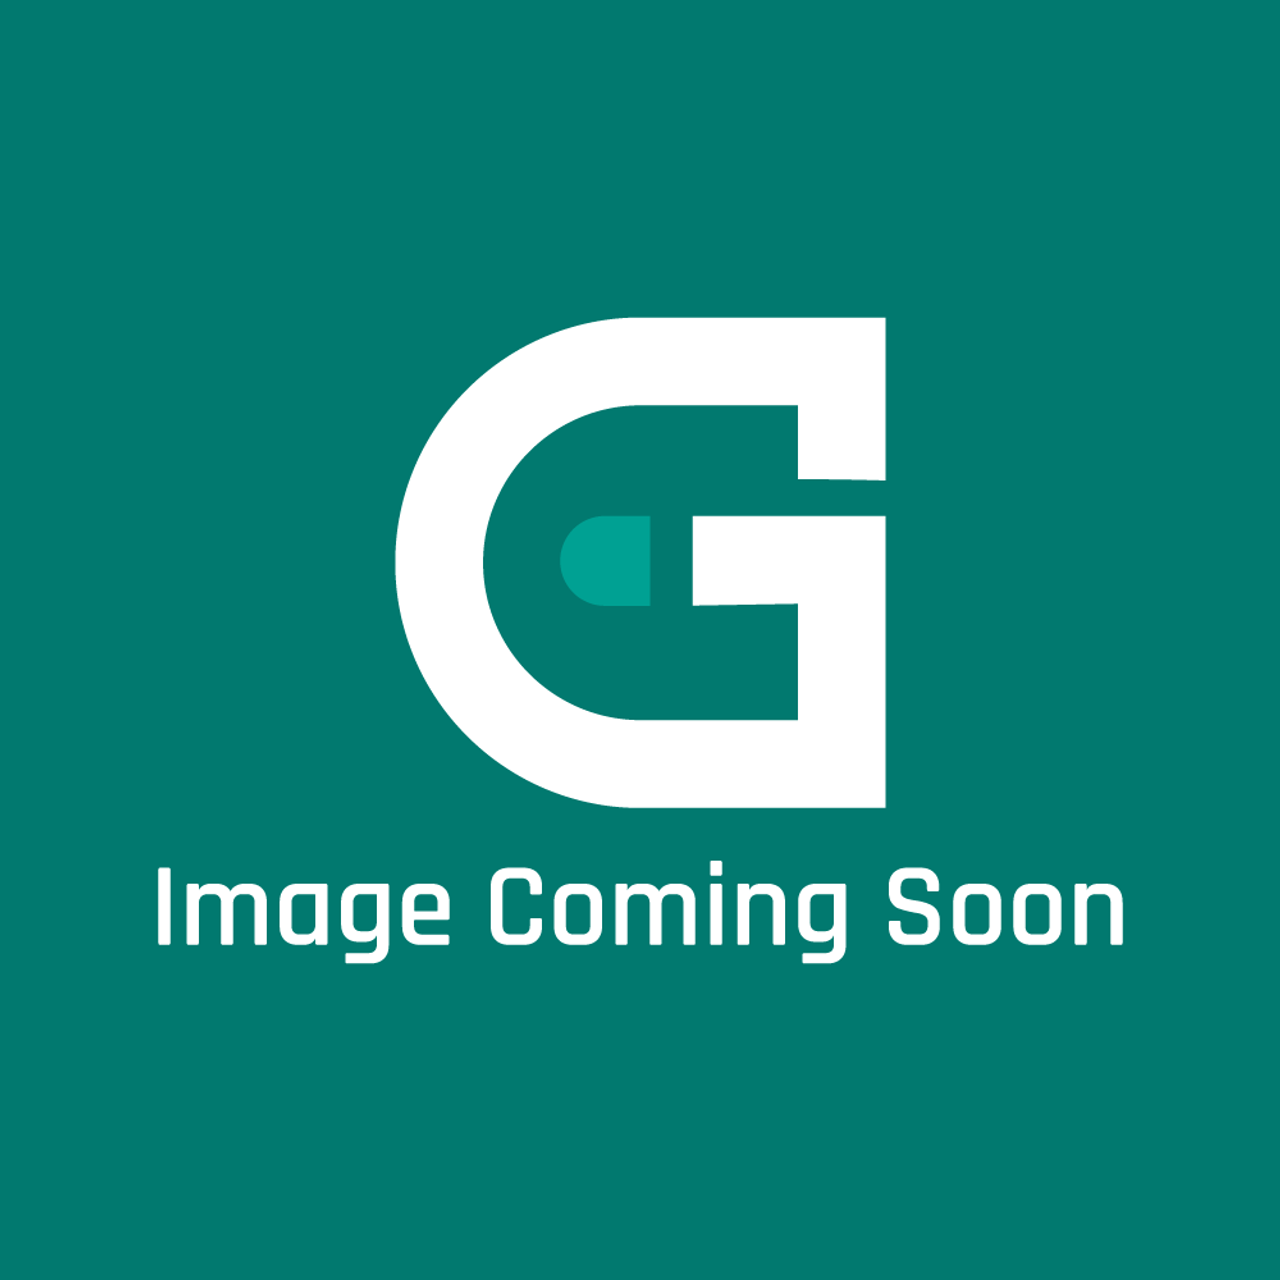 Frigidaire - Electrolux 316560146 Controller - Image Coming Soon!